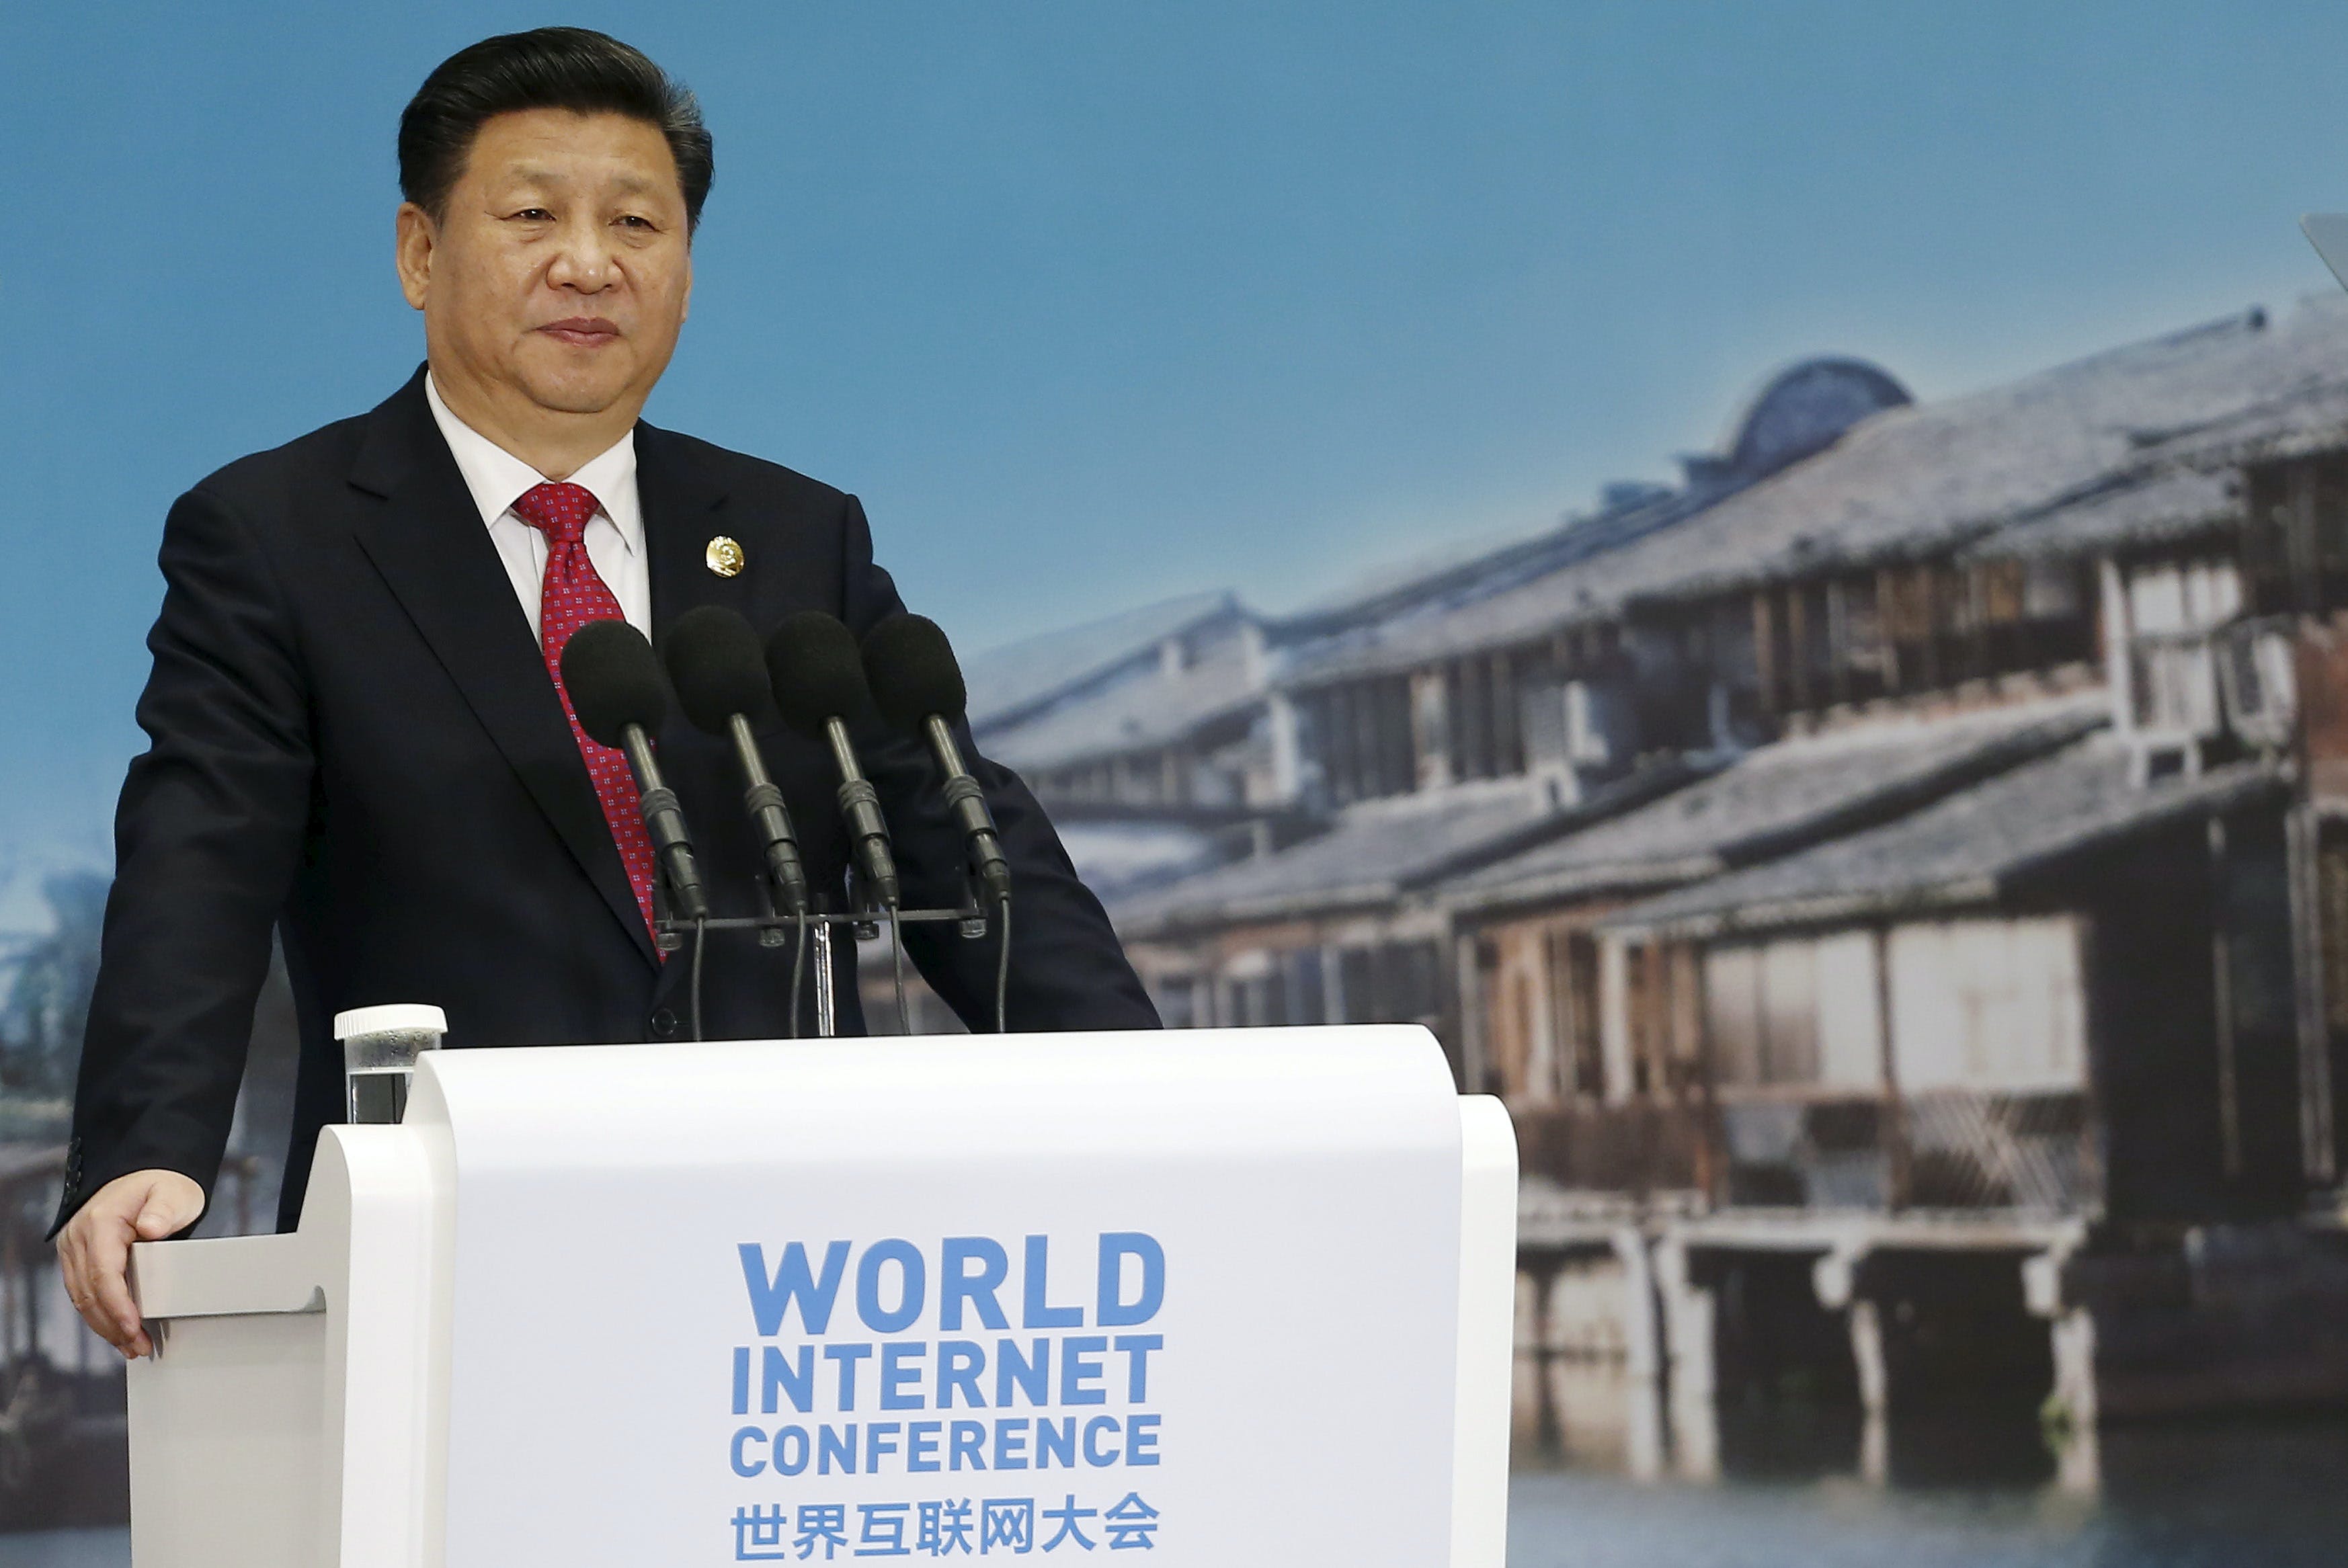 China's President Xi Jinping speaks during the opening ceremony of the 2nd annual World Internet Conference in Wuzhen town